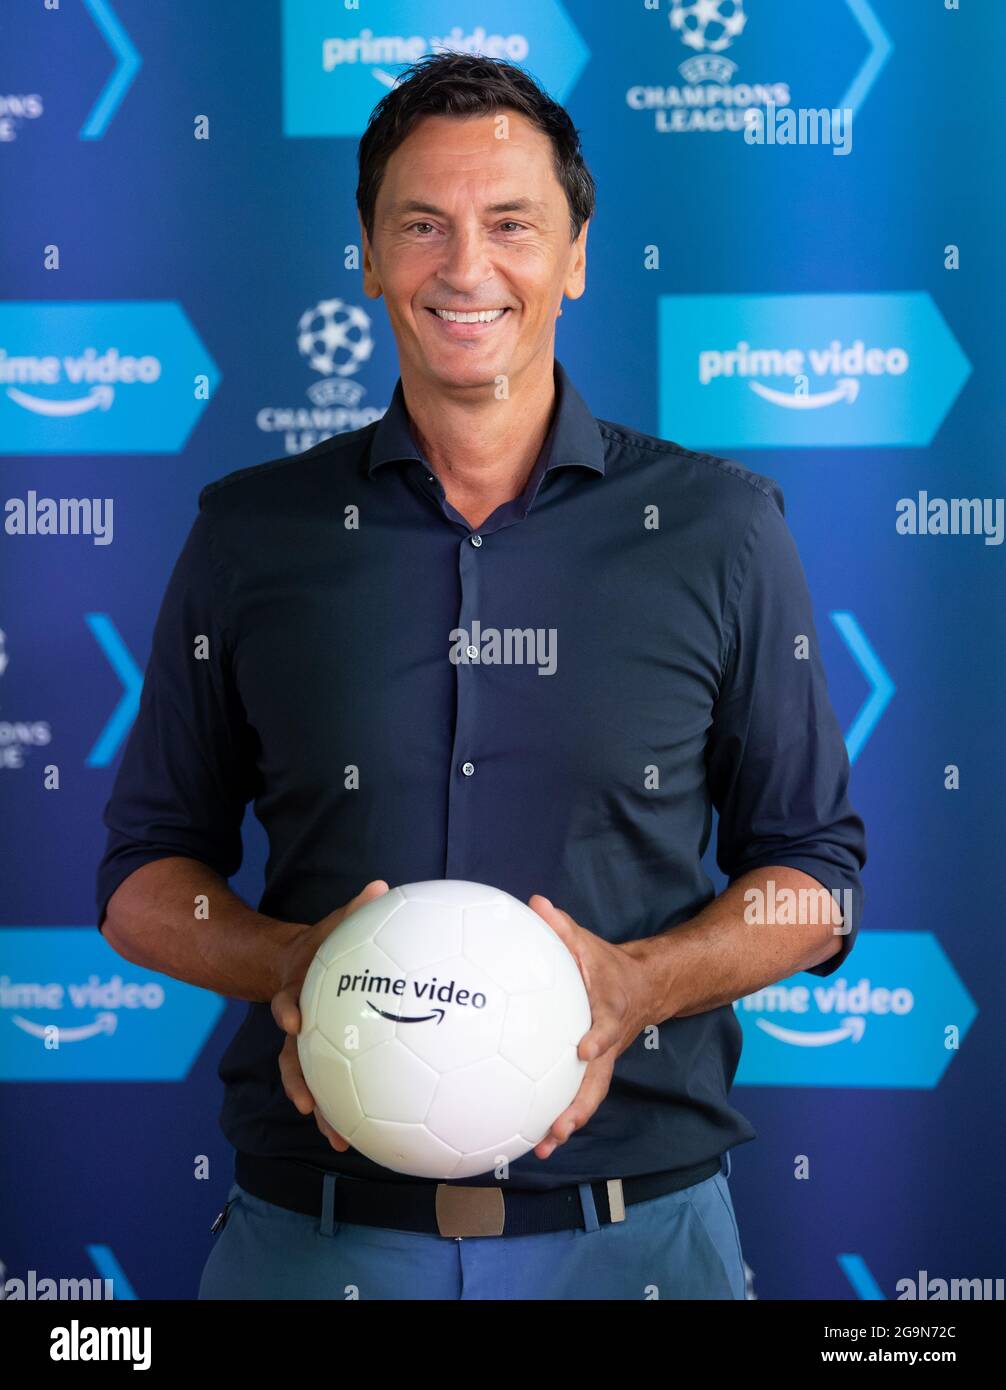 Munich, Germany. 27th July, 2021. Sebastian Hellmann, presenter, takes part  in a press conference of Amazon Prime Video. Amazon will show Champions  League matches from the 2021/22 season. On its paid streaming